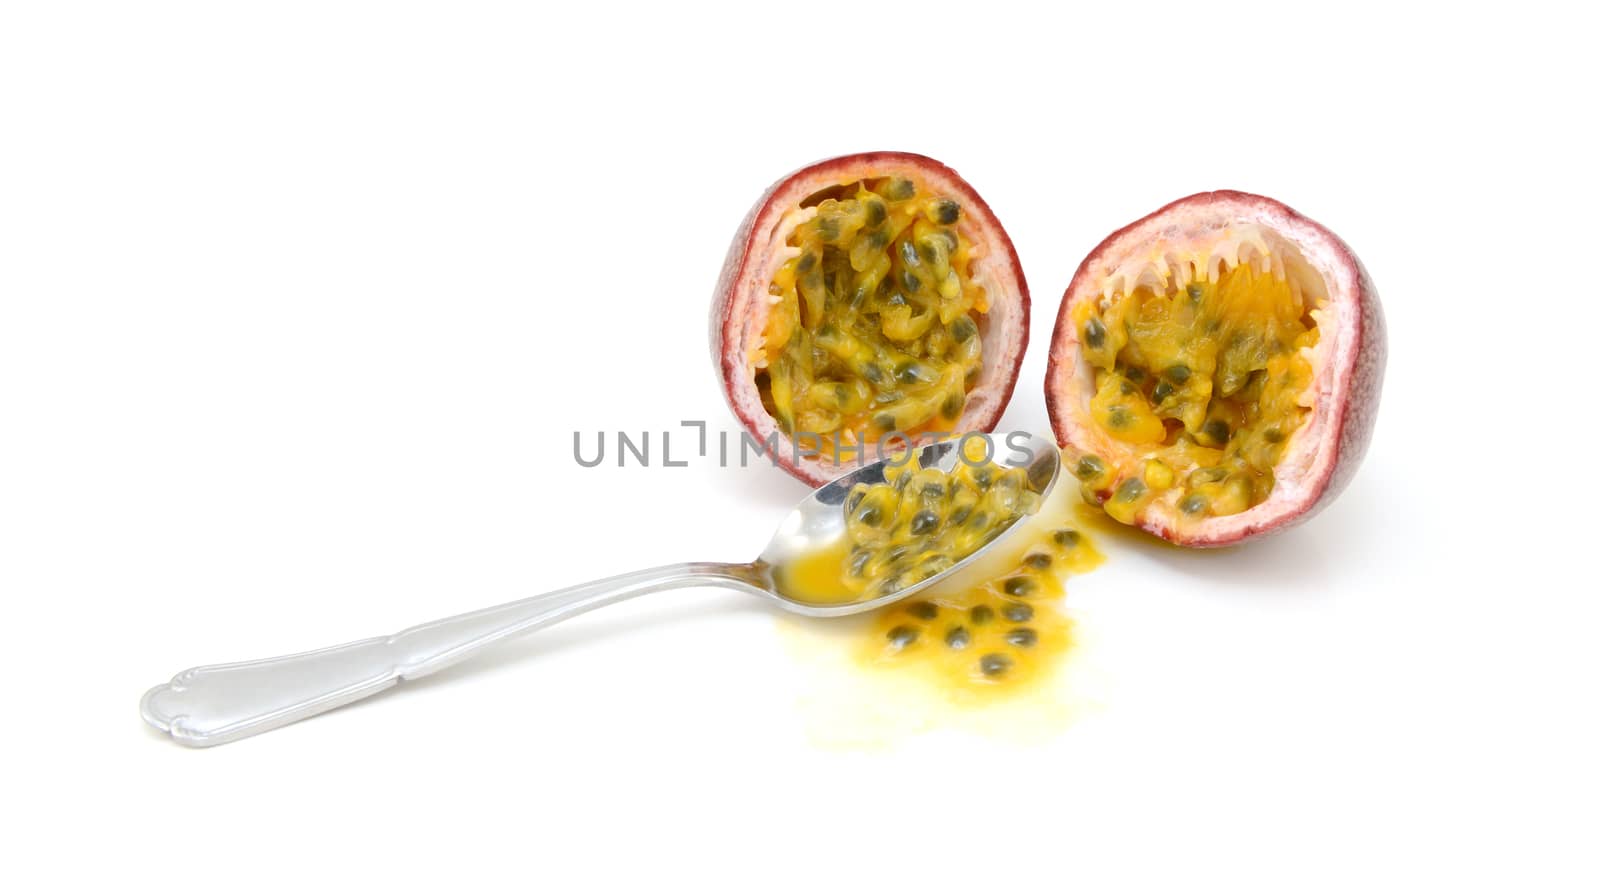 Spoon scooping out pulp and seeds from a purple passion fruit cut in half, on a white background